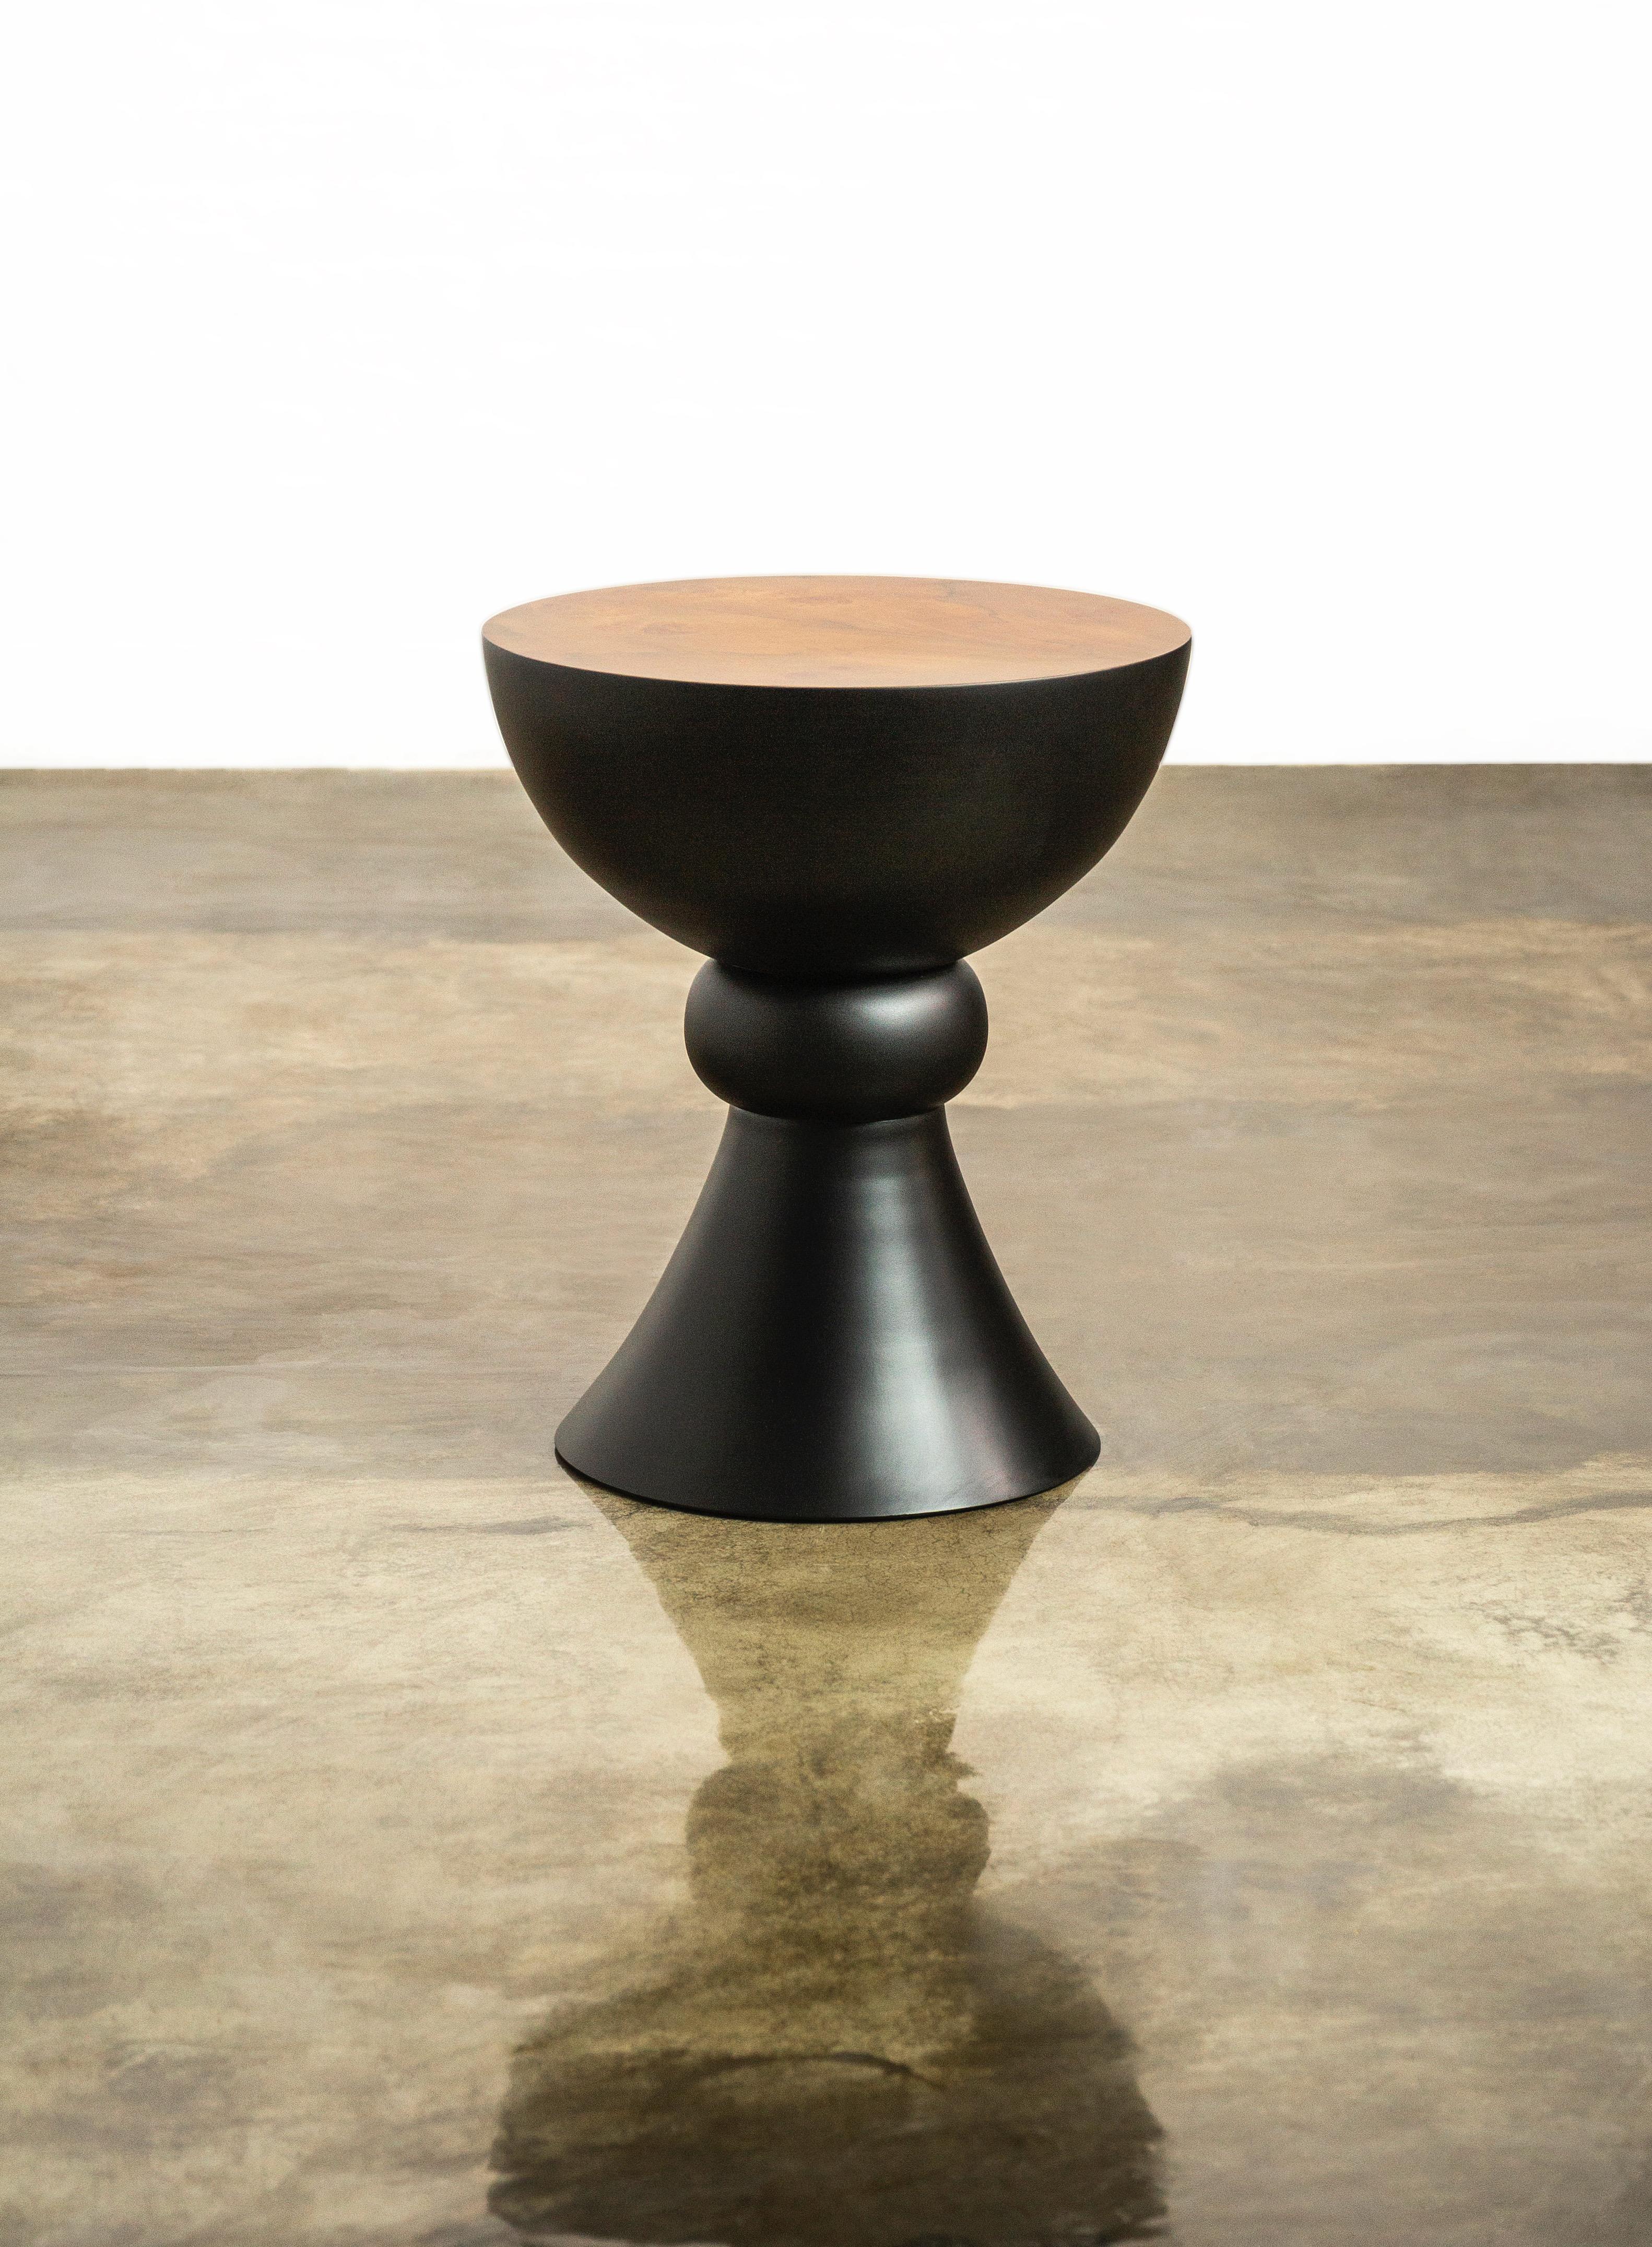 Caliz: A Turned Sculptural Walnut Burl Occasional Side Table from Costantini Design 

Measurements are 18.5 diameter by 22.5 high.  

The Caliz occasional table, which can also function as seating, takes its name as well as its form from the Spanish